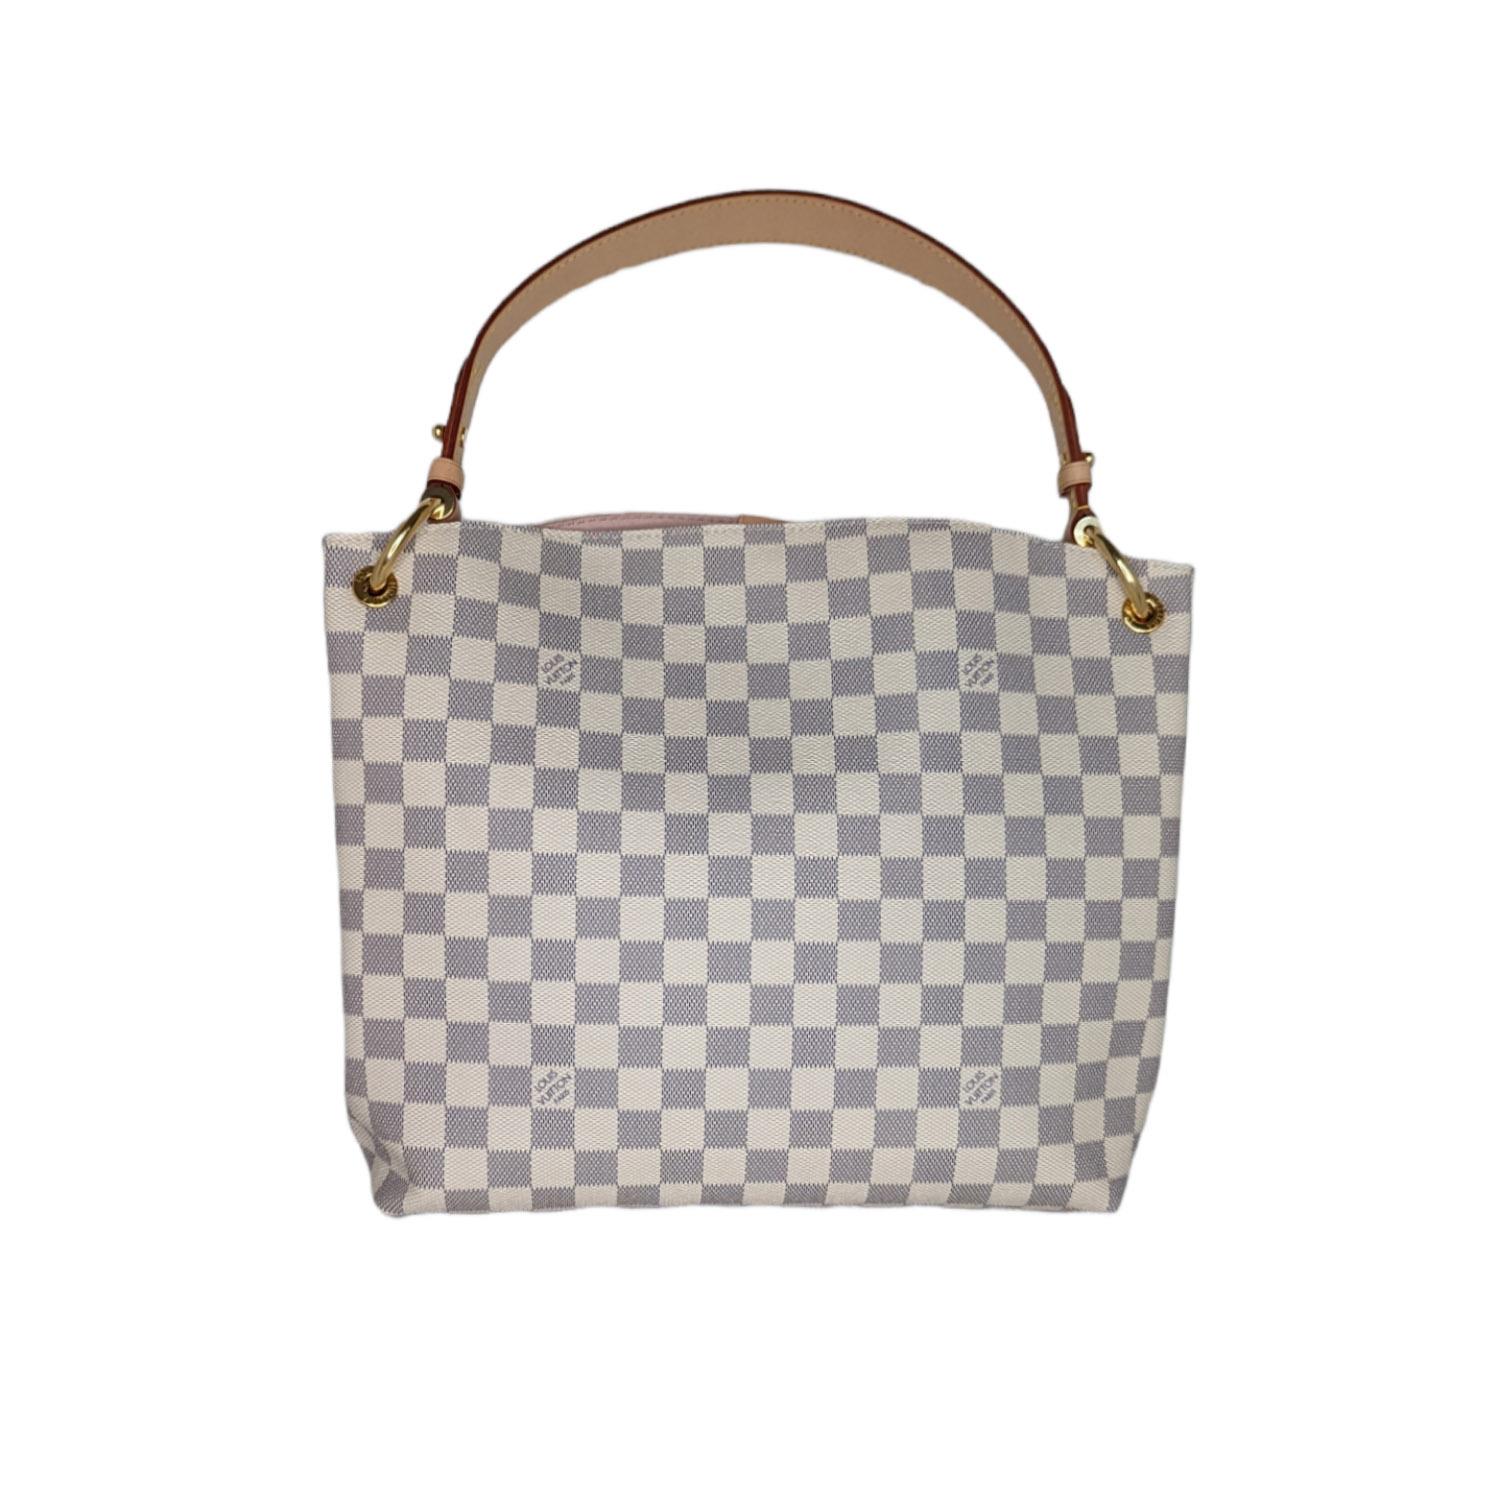 Louis Vuitton Graceful Pm Azur - For Sale on 1stDibs